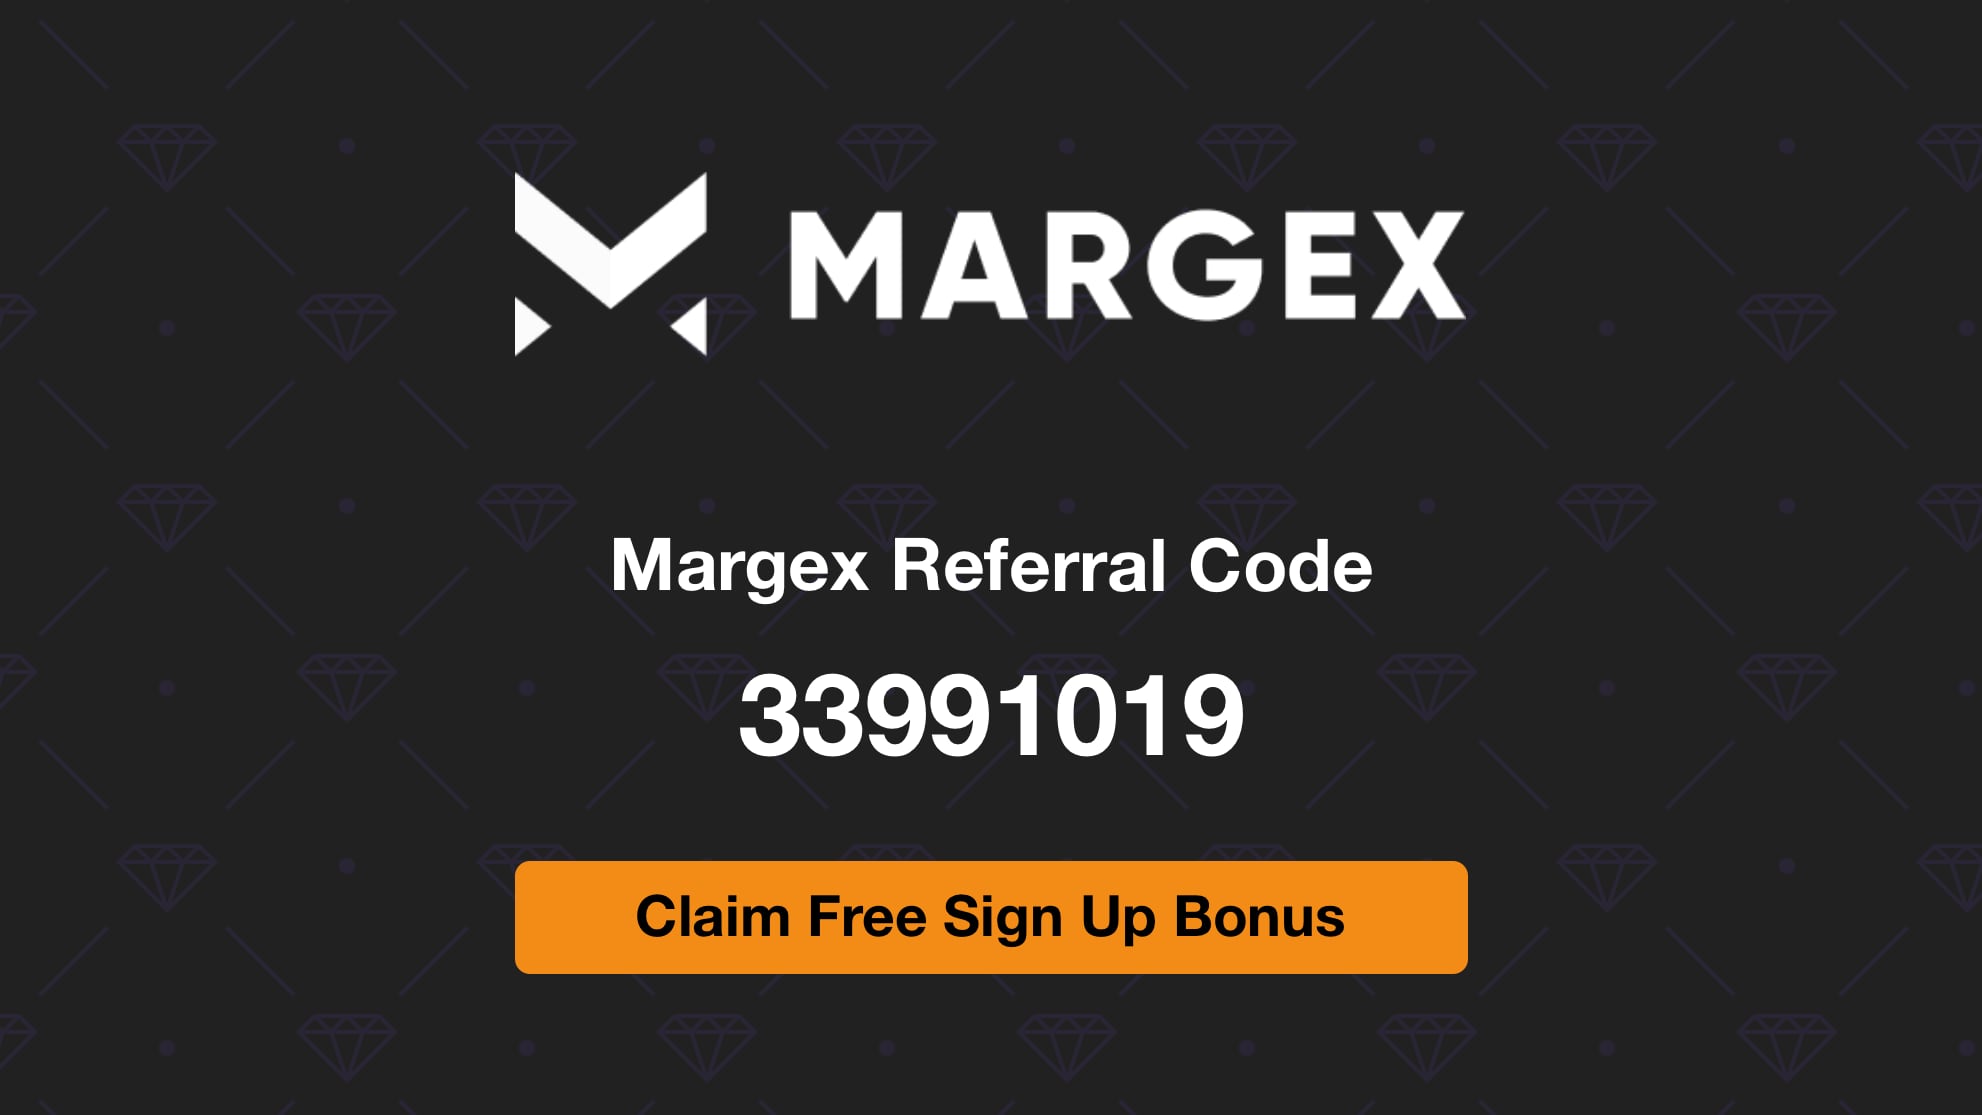 Margex Referral Code 33991019